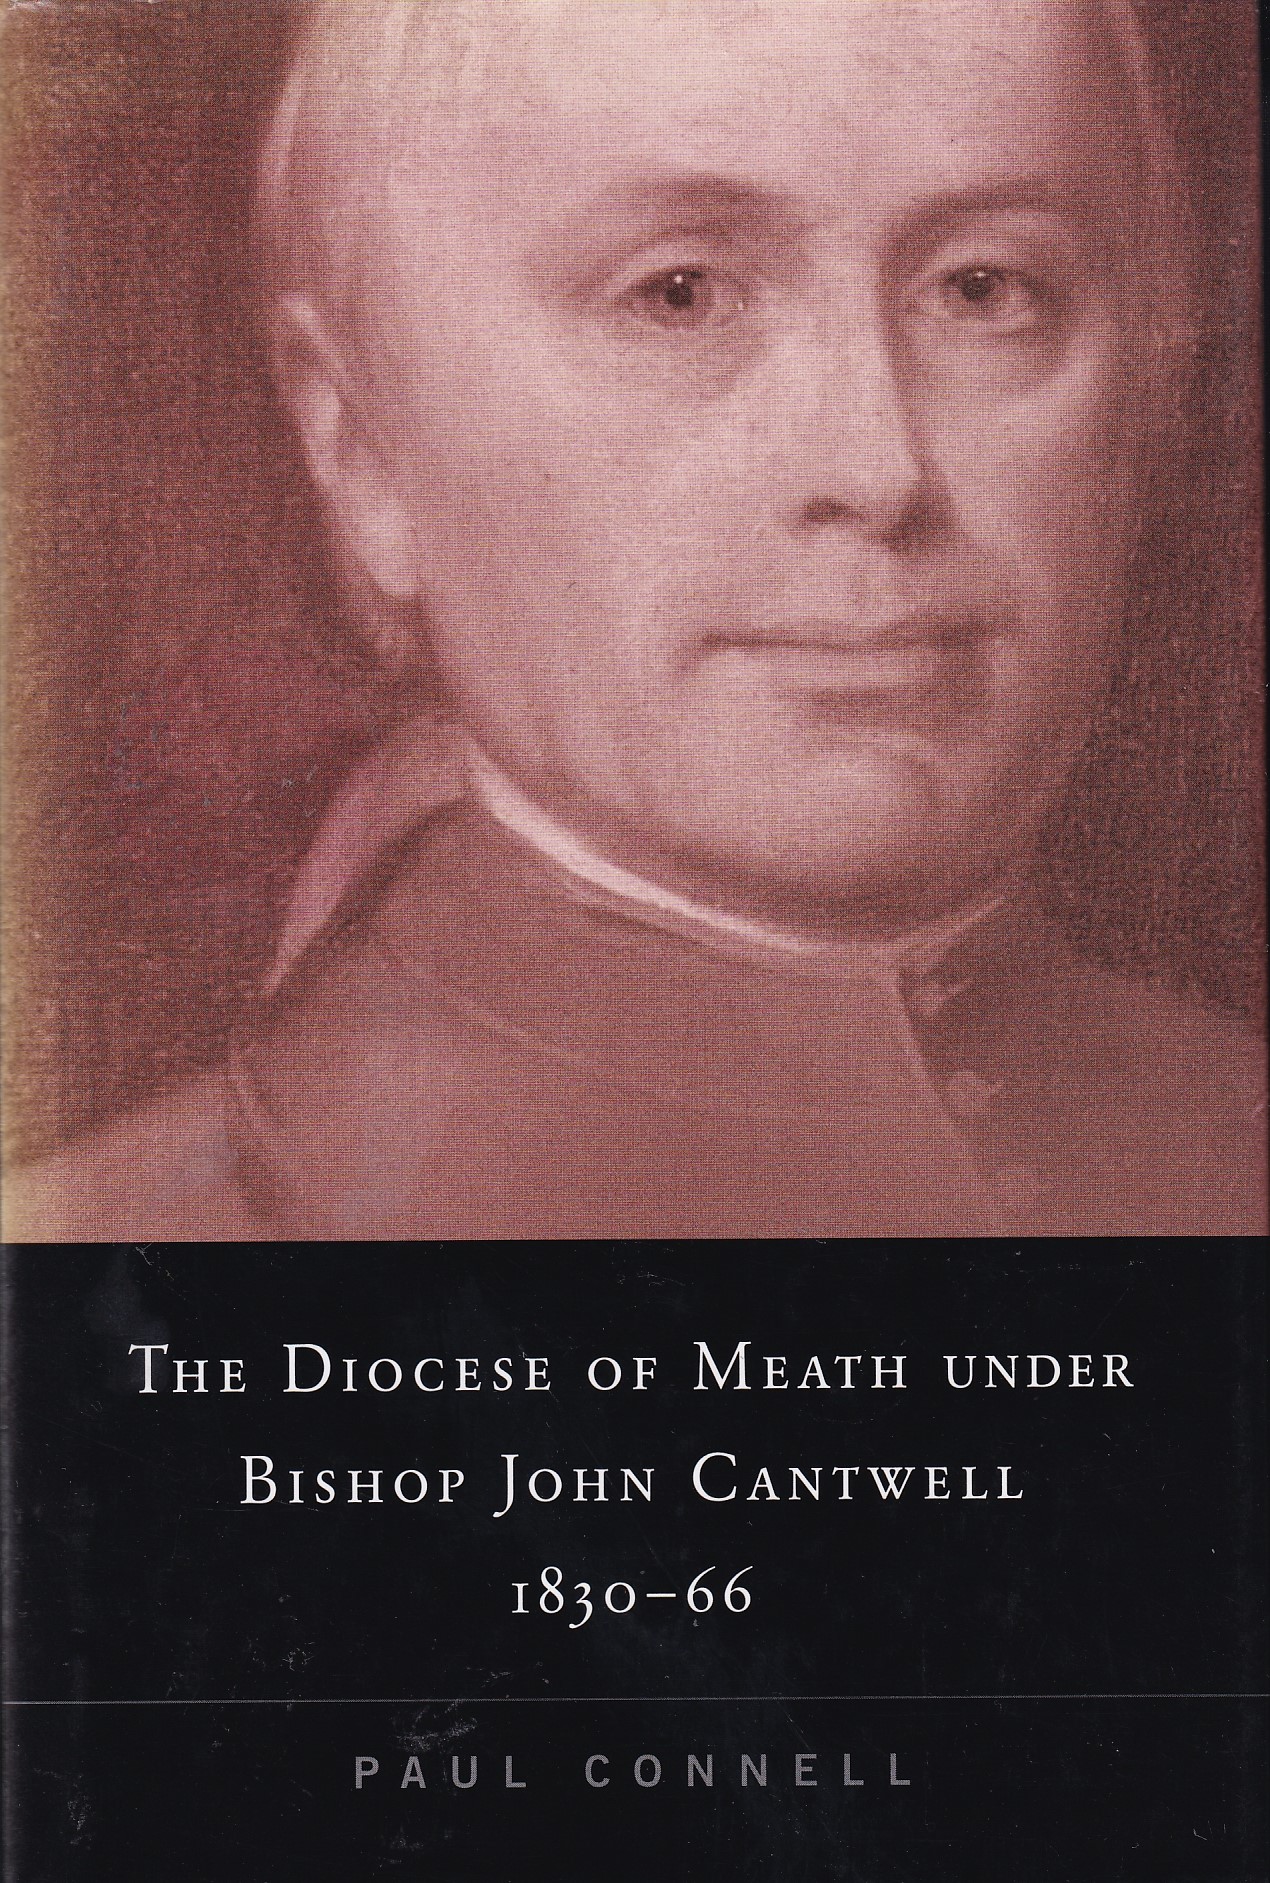 The Diocese of Meath under Bishop John Cantwell, 1830-66 | Paull Connell | Charlie Byrne's